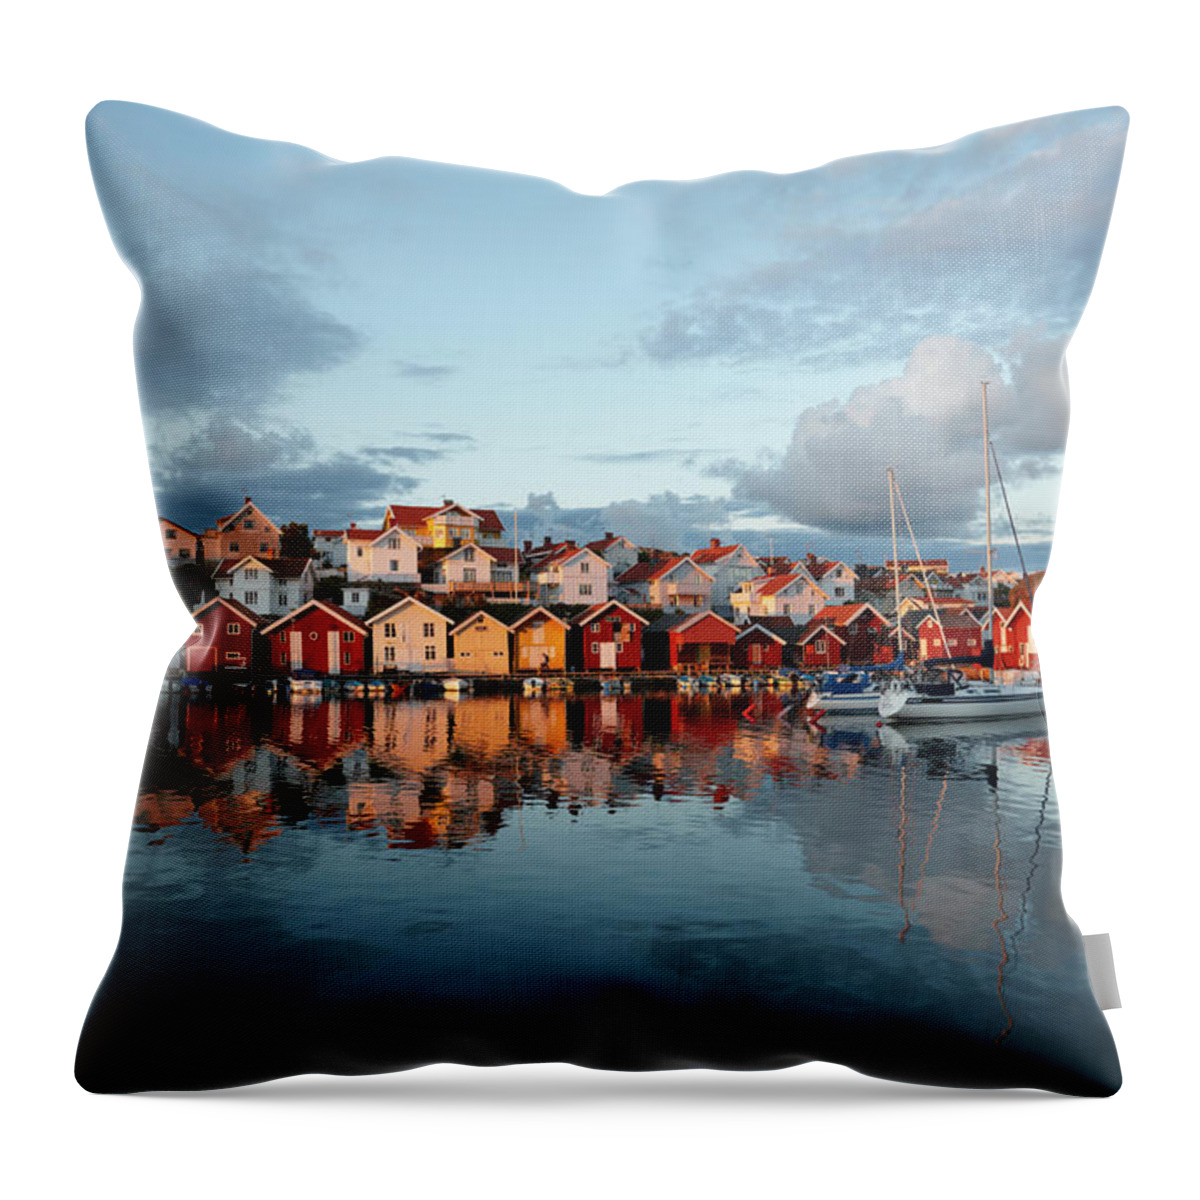 Tranquility Throw Pillow featuring the photograph Houses By The Sea At Sunset, Sweden by Tove, Jan